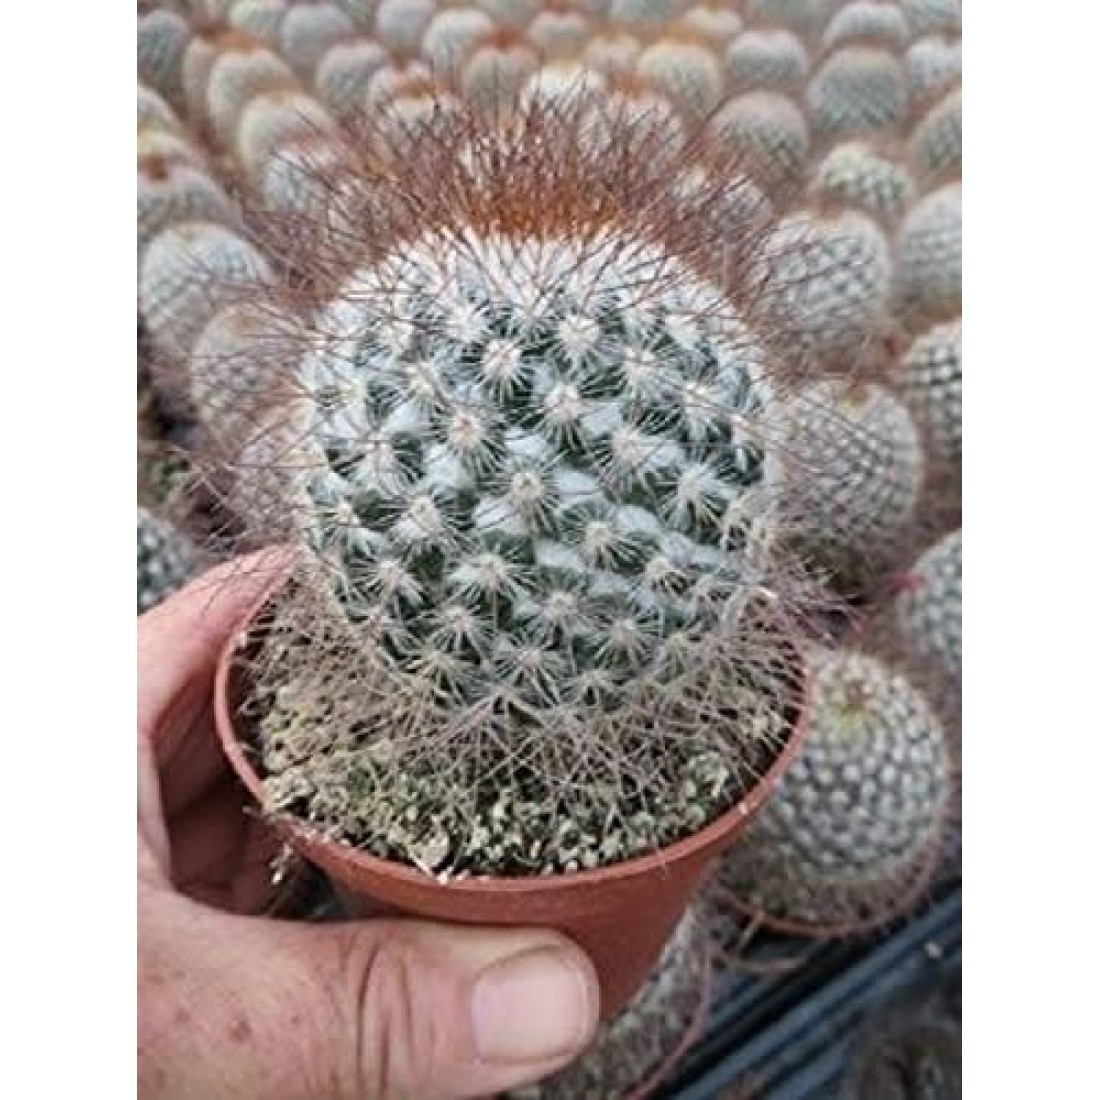 Mammillaria LEPTACANTHA cactus live plant ( size 3 inches) flowering size 1